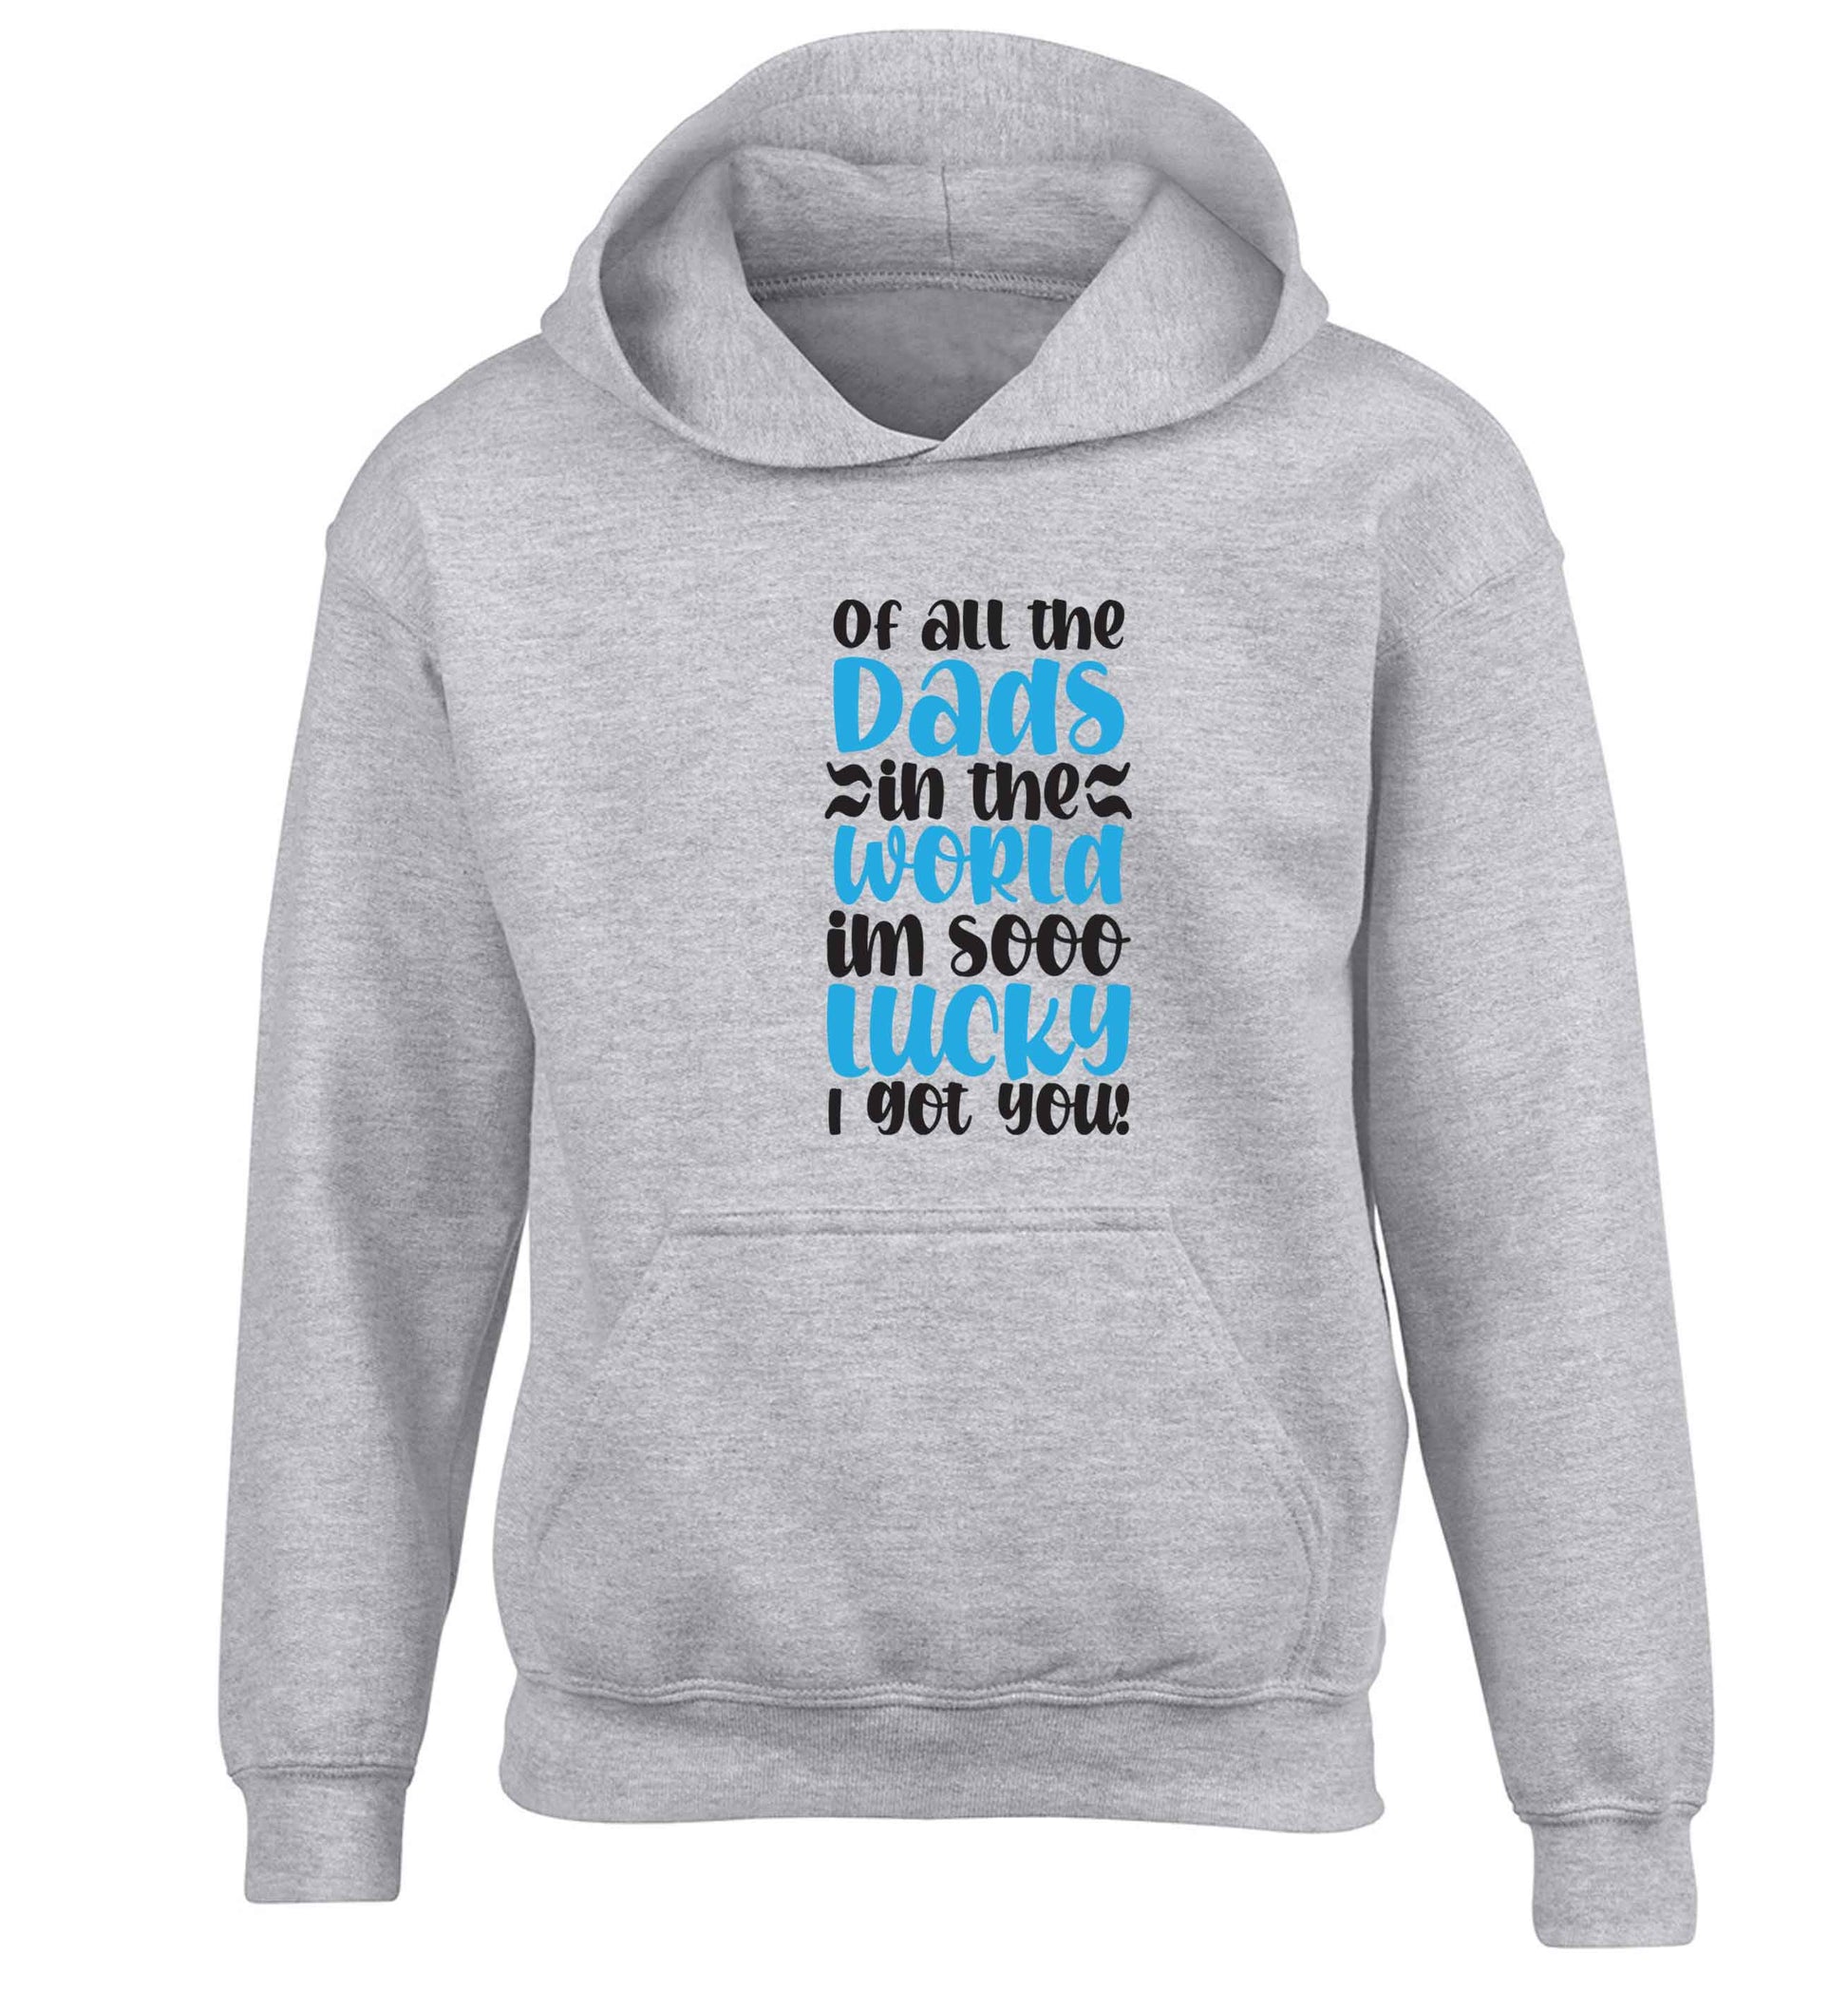 I'm as lucky as can be the worlds greatest dad belongs to me! children's grey hoodie 12-13 Years